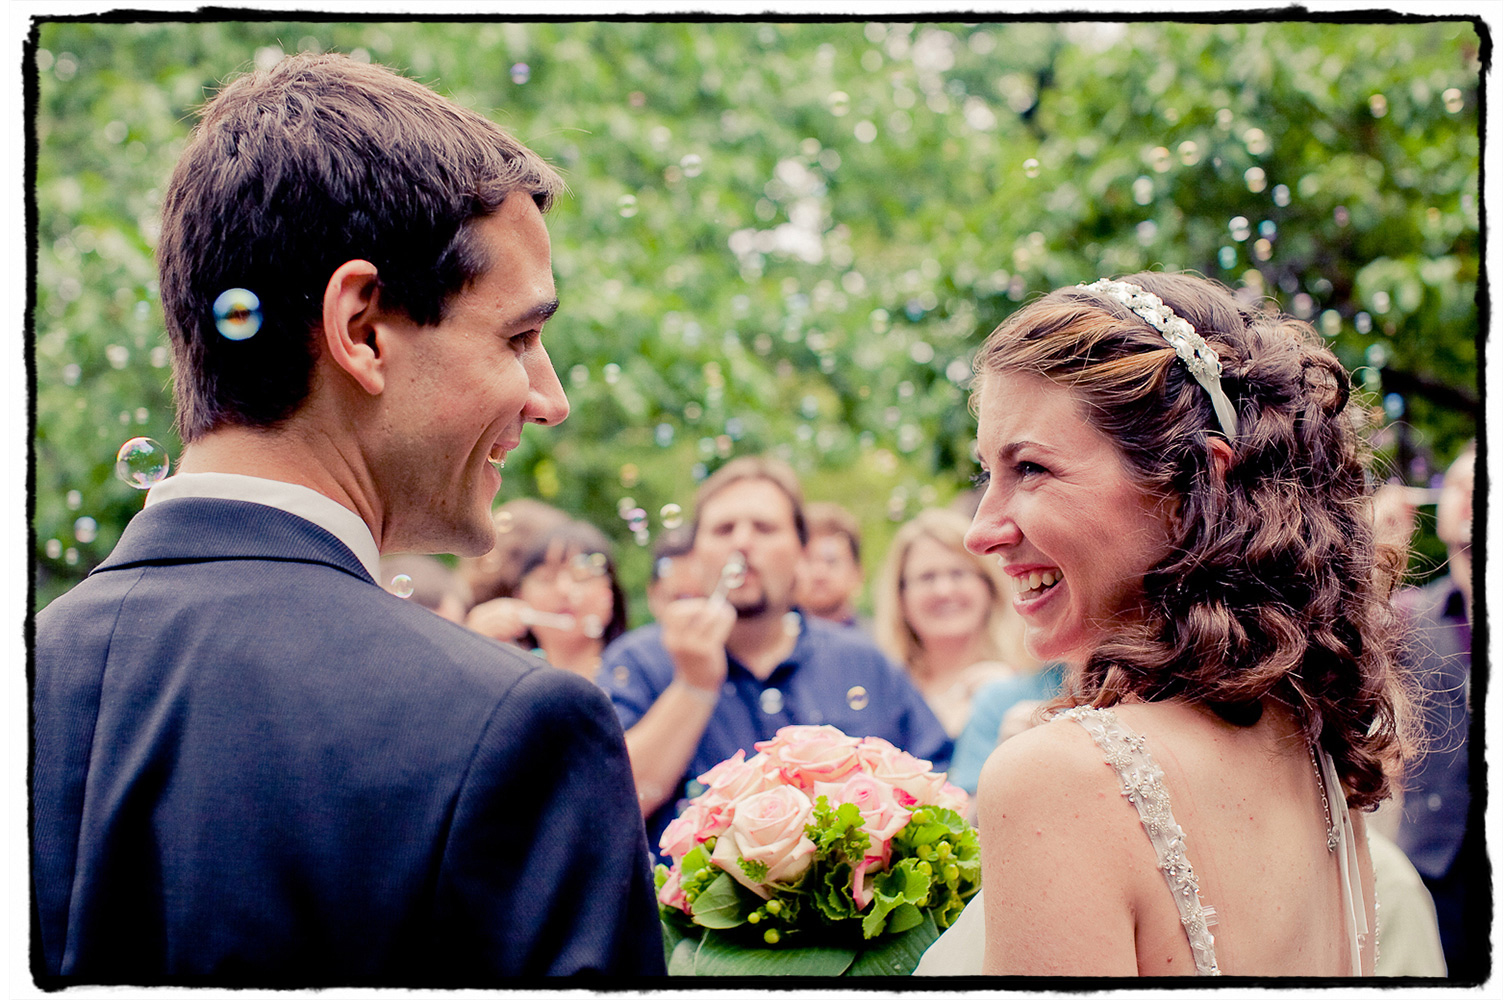 Julie and Andy smile lovingly at one another as guests blow bubbles in celebration of the conclusion of their ceremony at The Shakespeare Garden in Central Park.